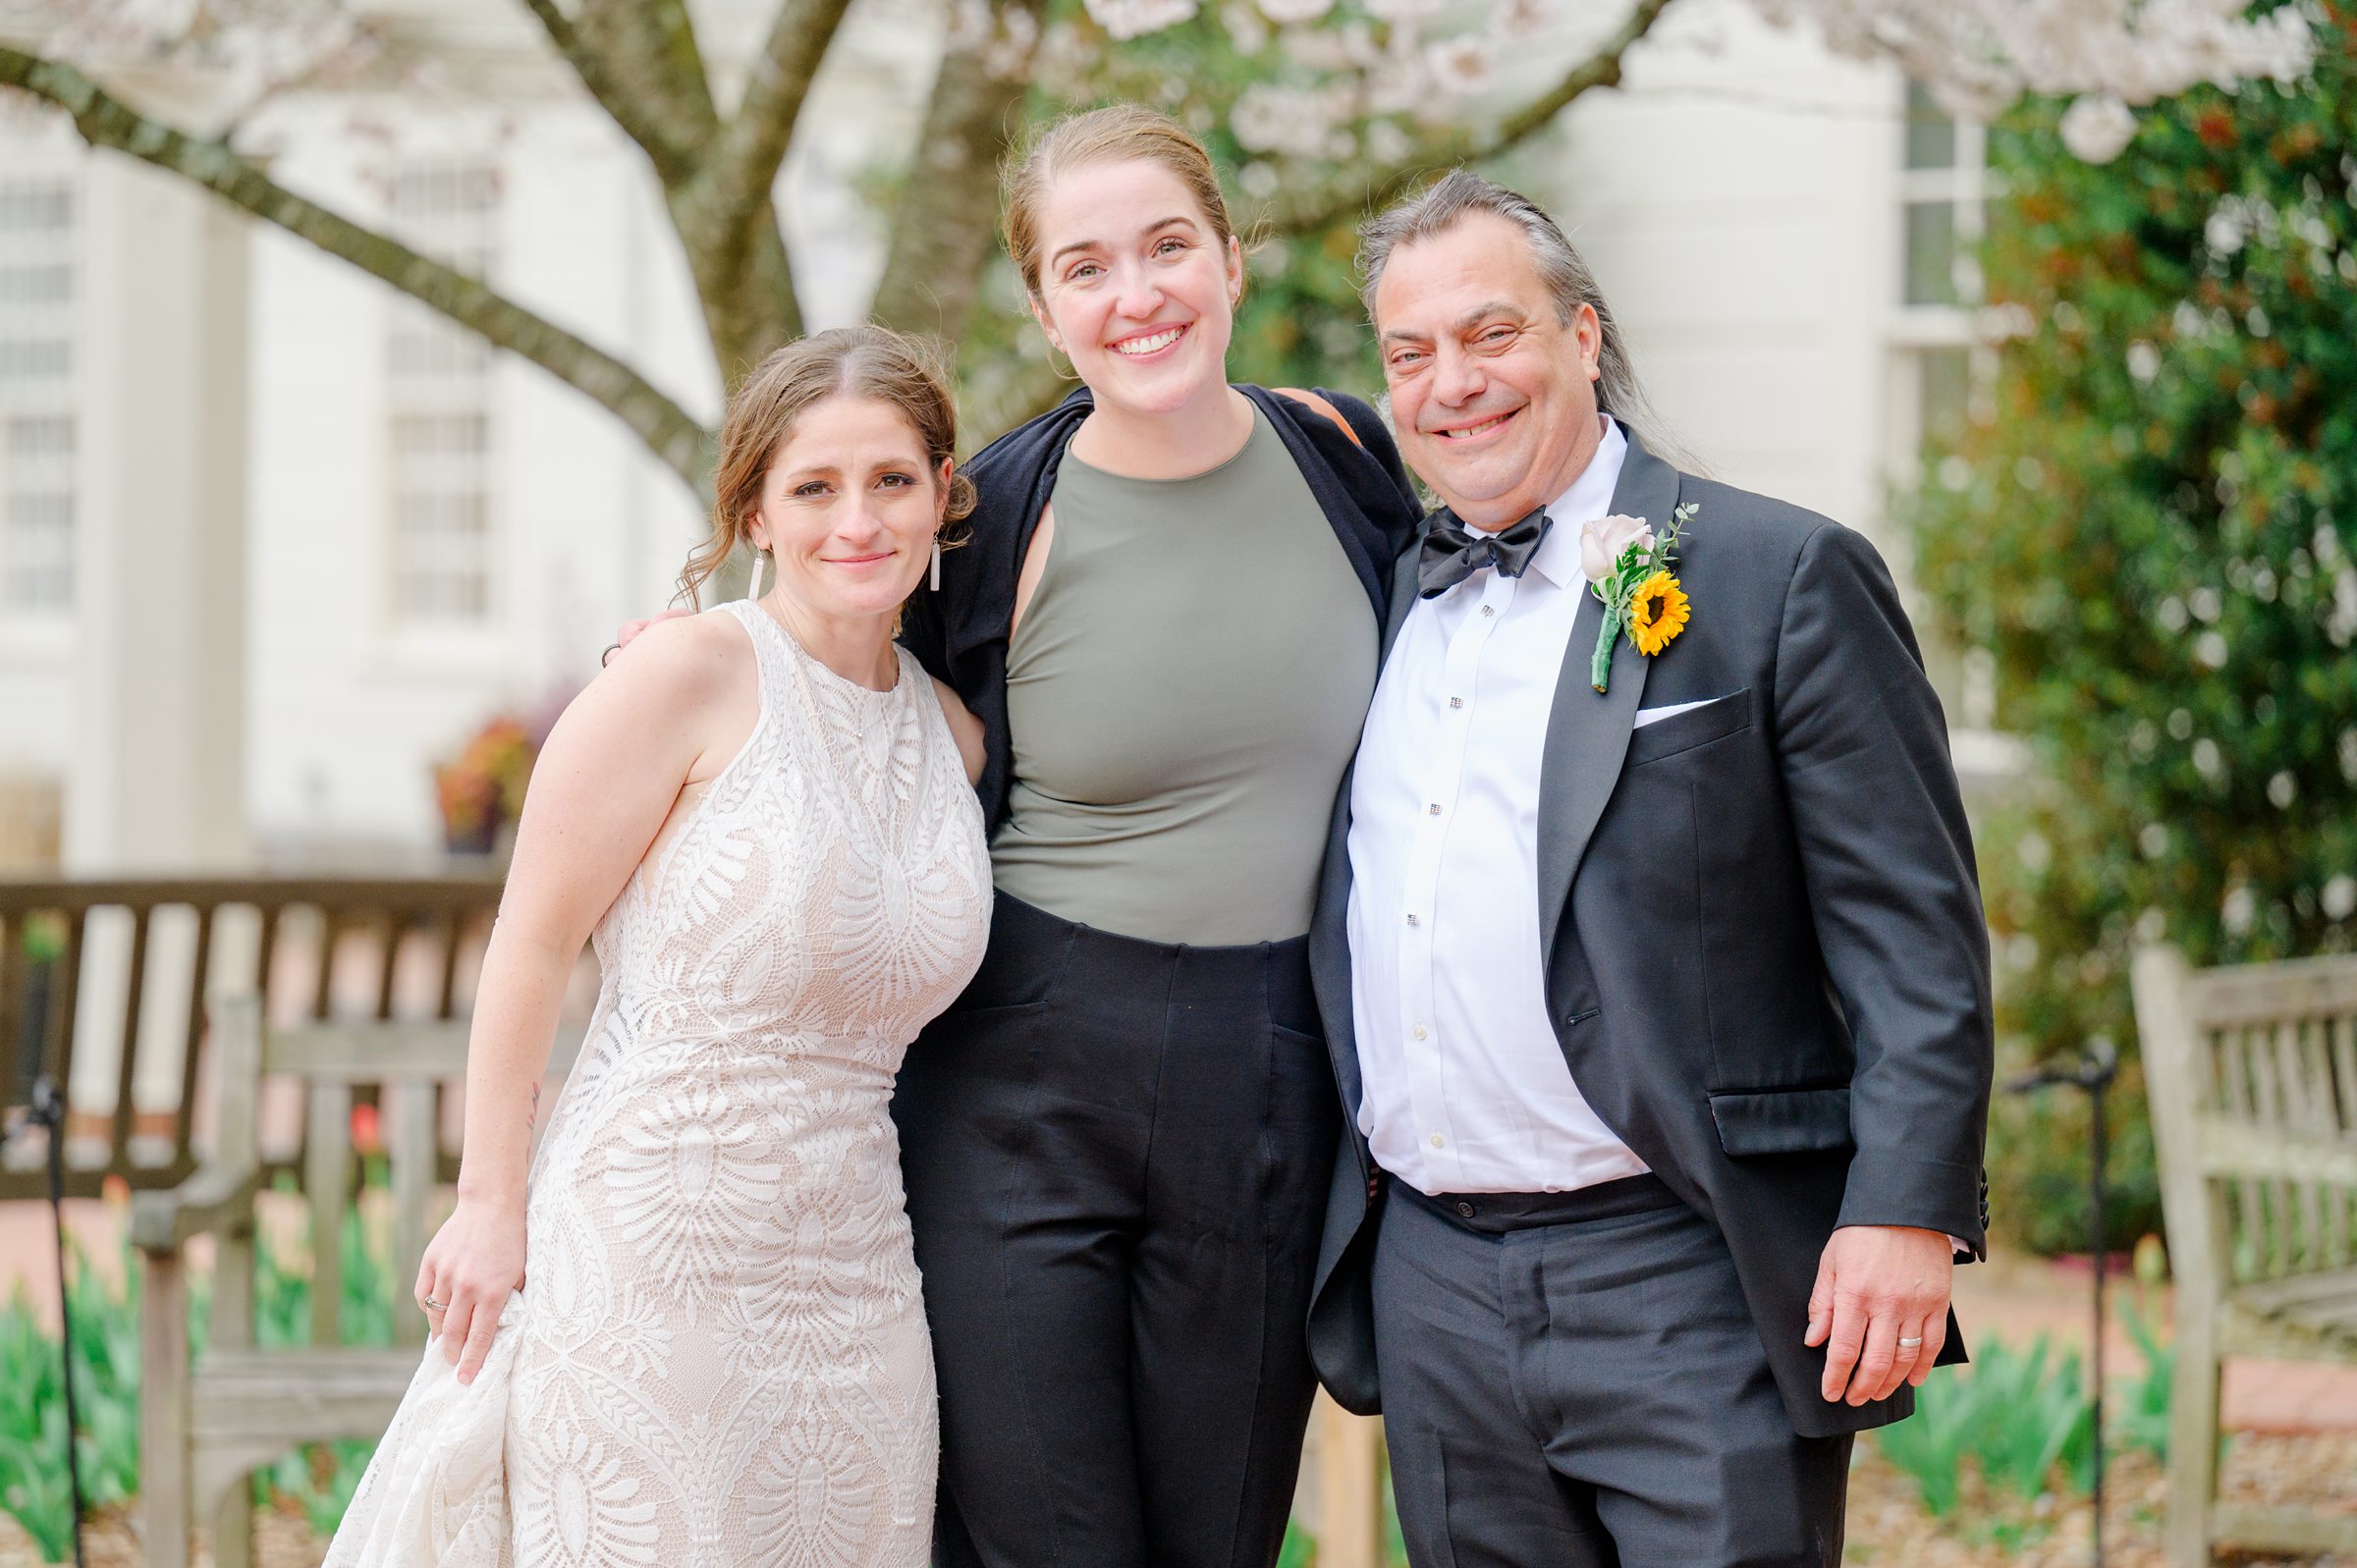 Spring Wedding in Alexandria, Virginia photographed by Baltimore Photographer Cait Kramer Photography.